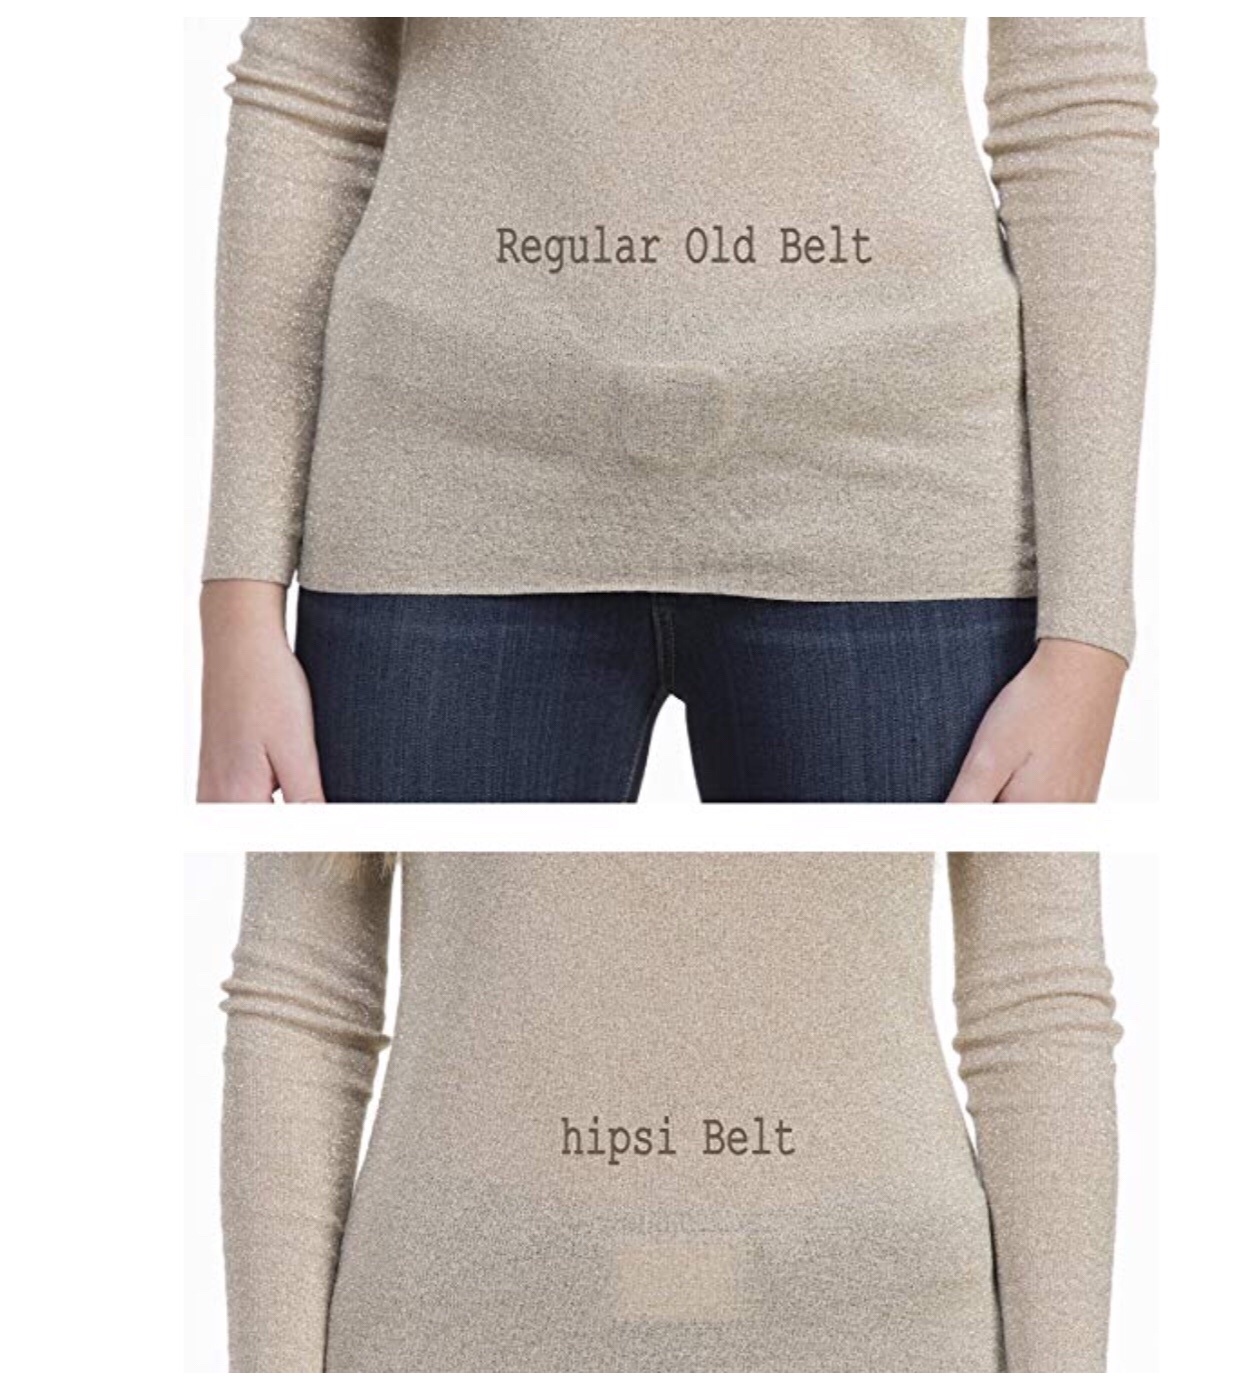 Hipsi Belt before and after